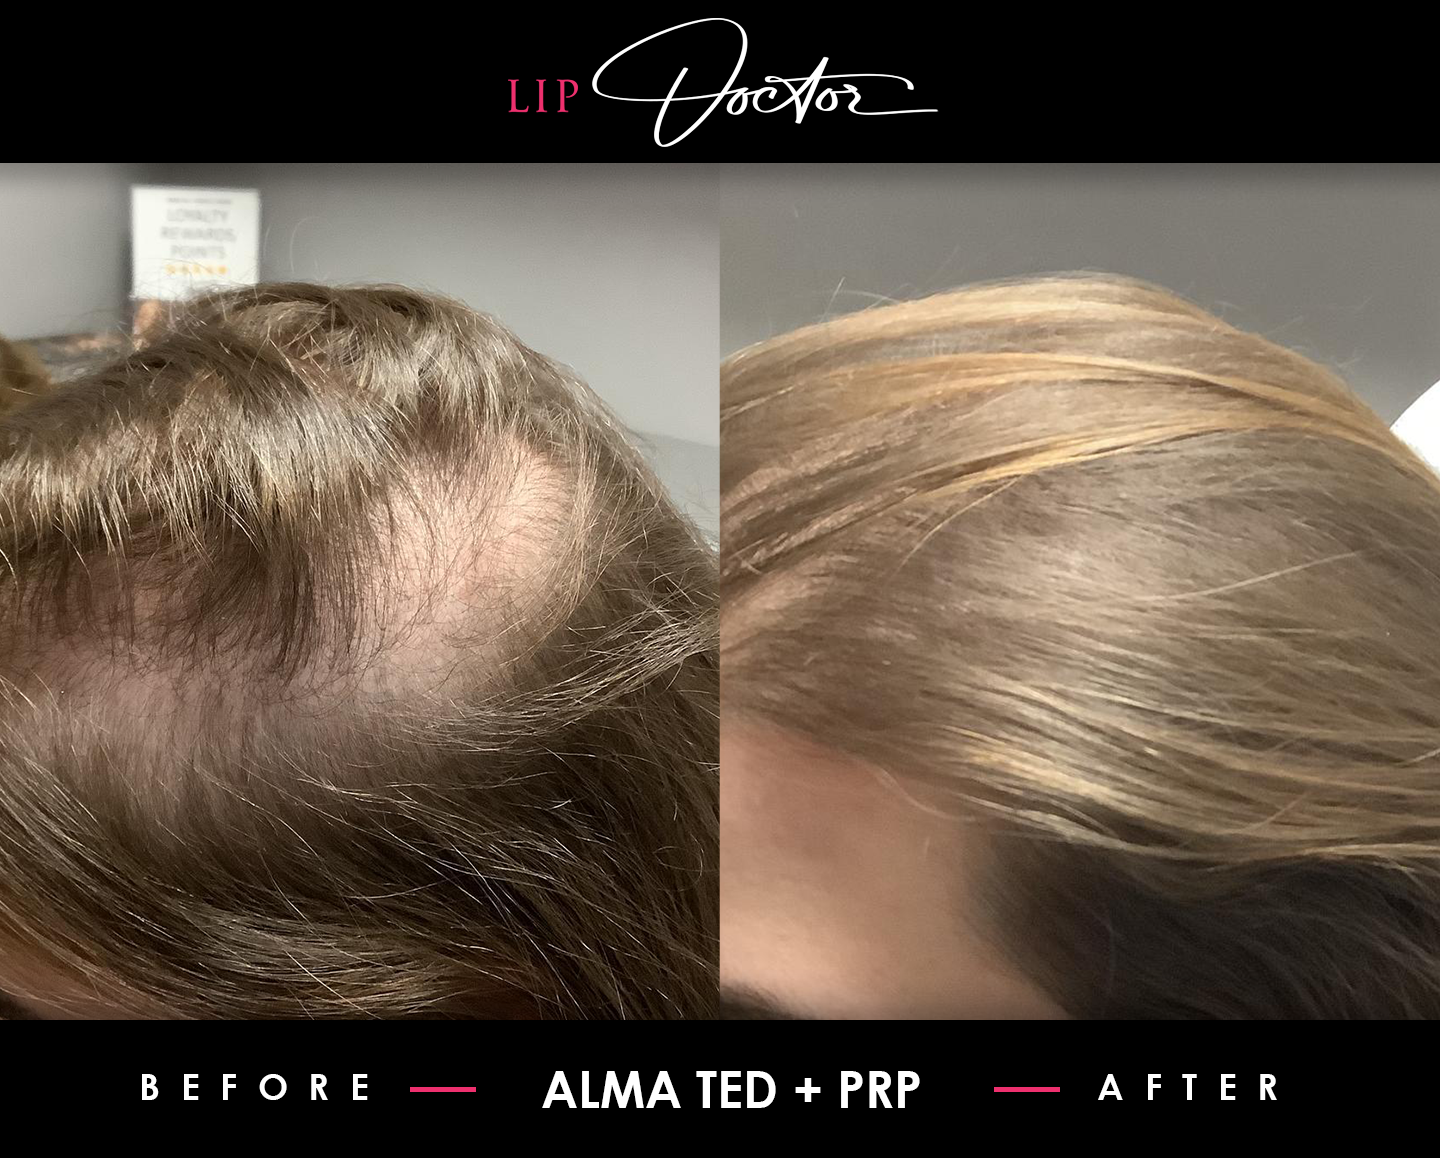 Transformative hair recovery with PRP therapy at The Lip Doctor, depicted in before and after photos